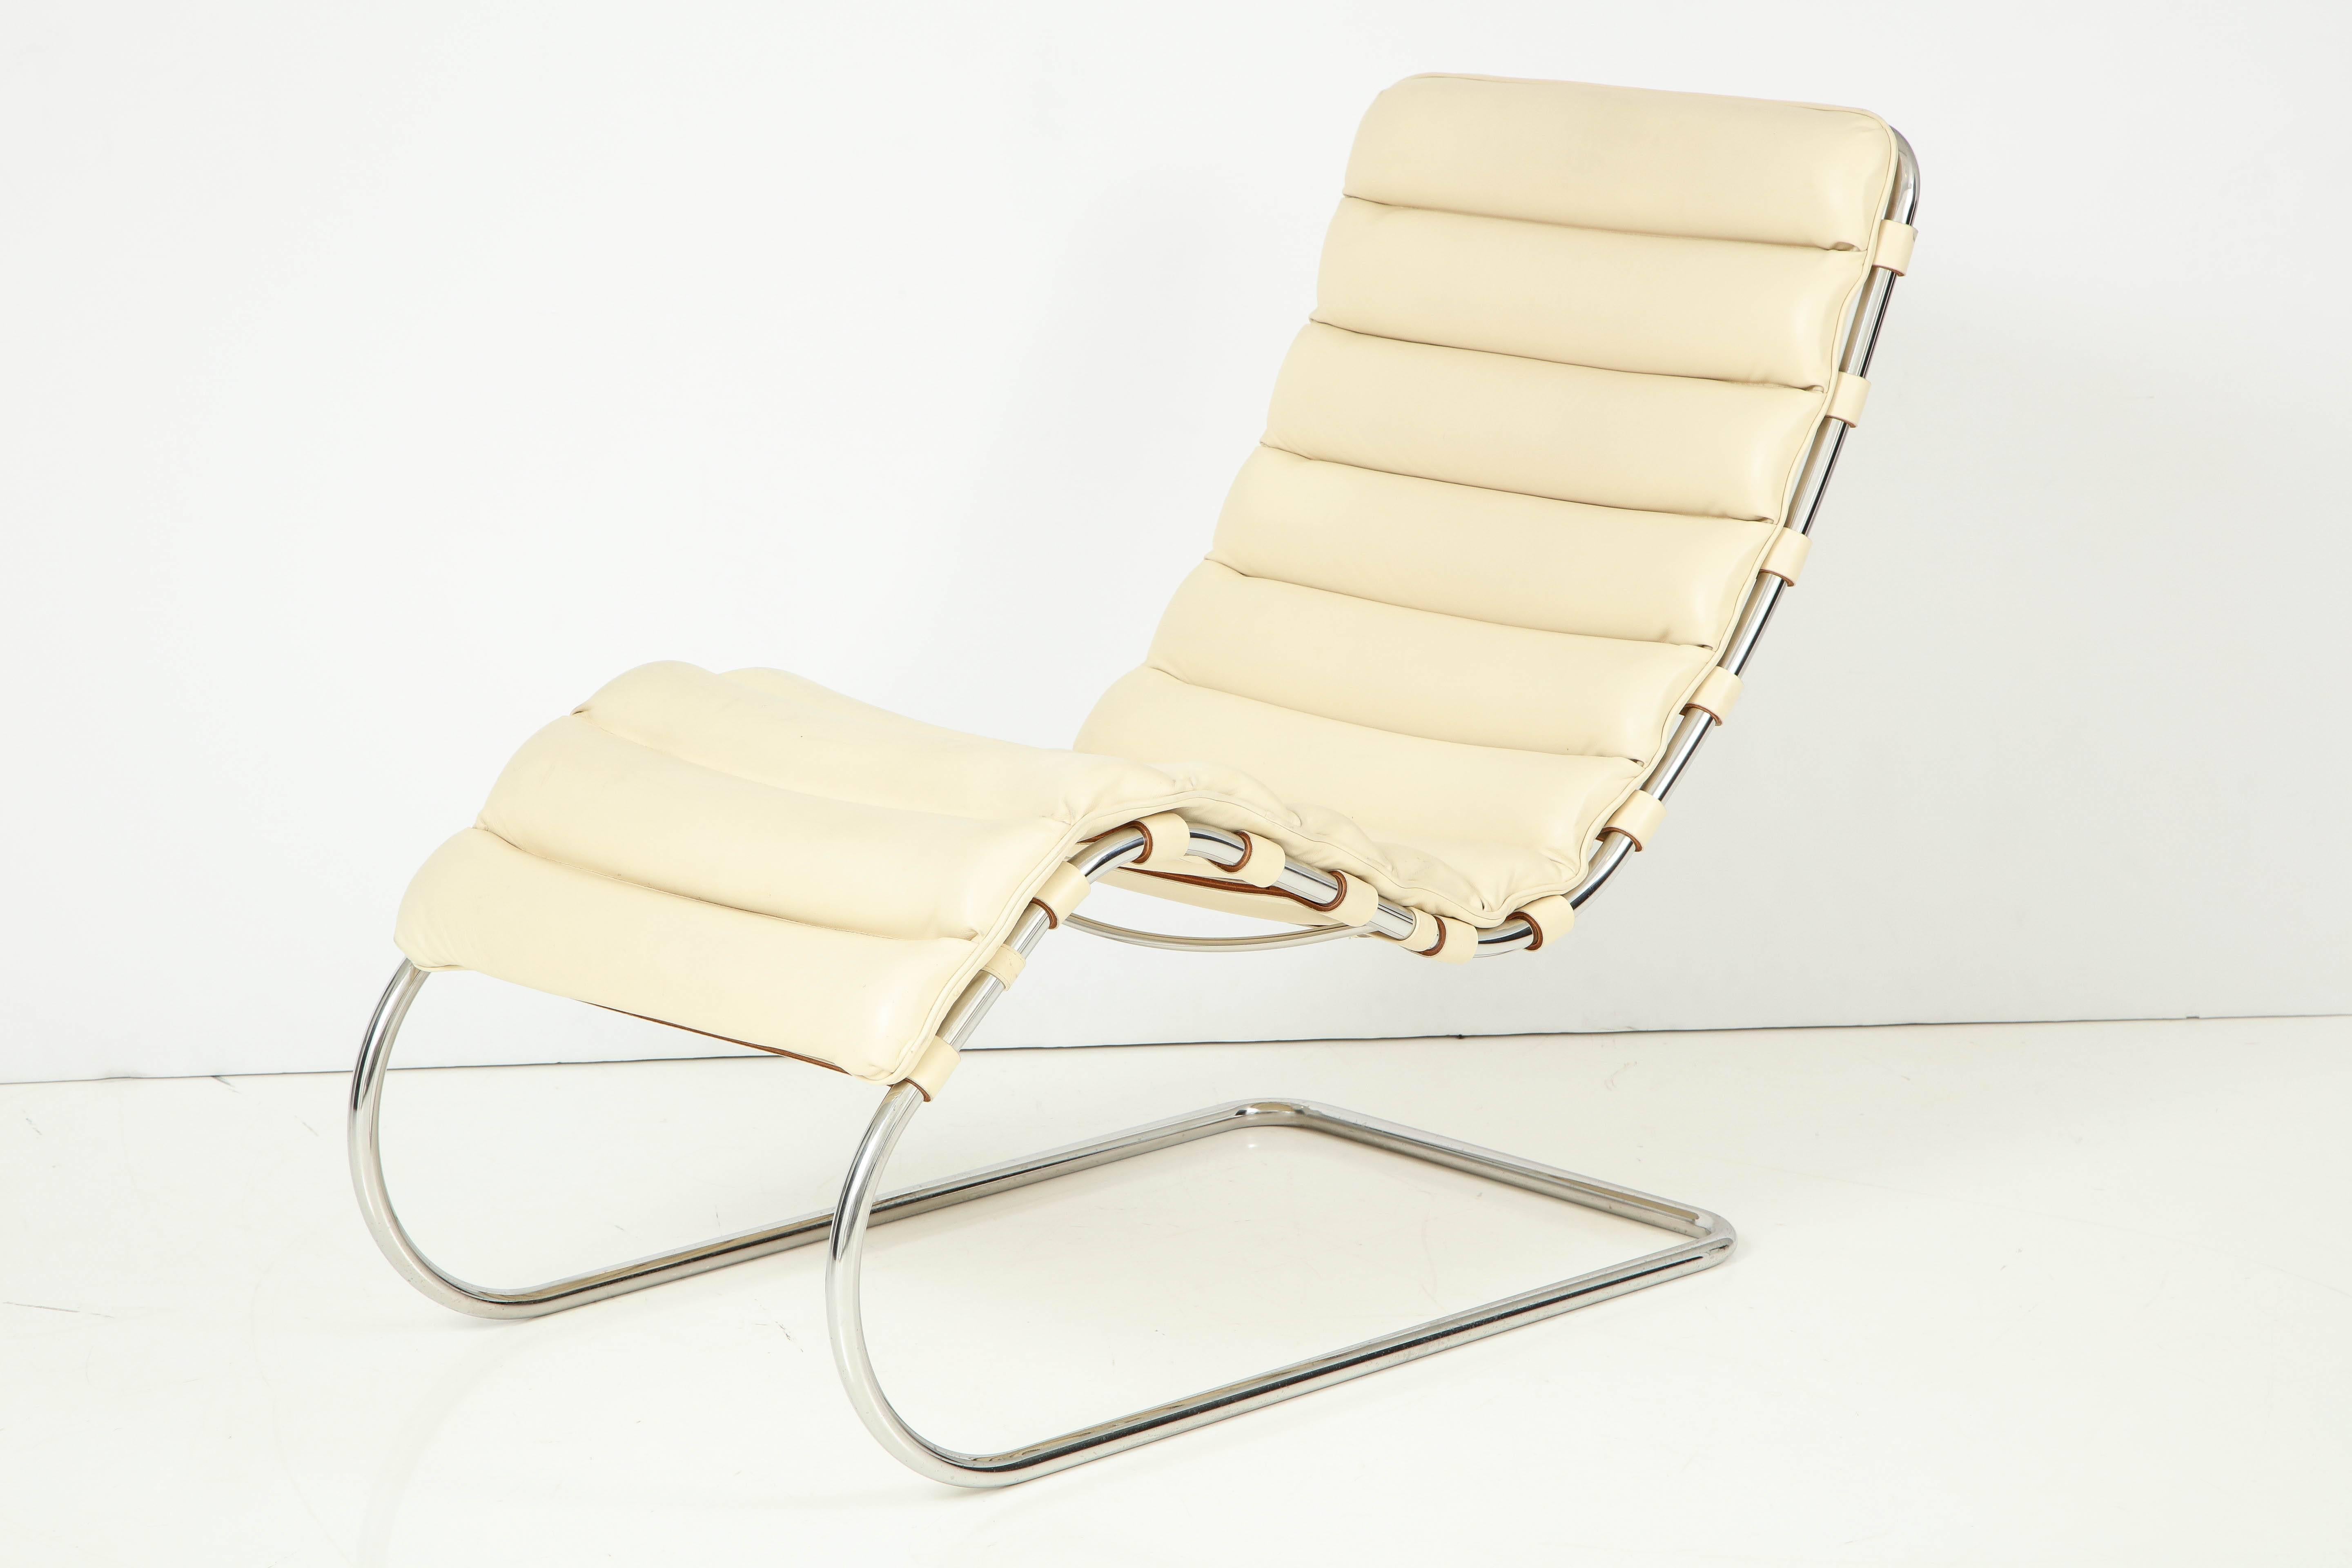 Ludwig Mies van der Rohe MR Chaise made for Knoll in the 1980s. This piece is made of a seamless tubular stainless steel frame with polished finish and an ivory leather cushion crafted in a series of quilted and seamed sections.